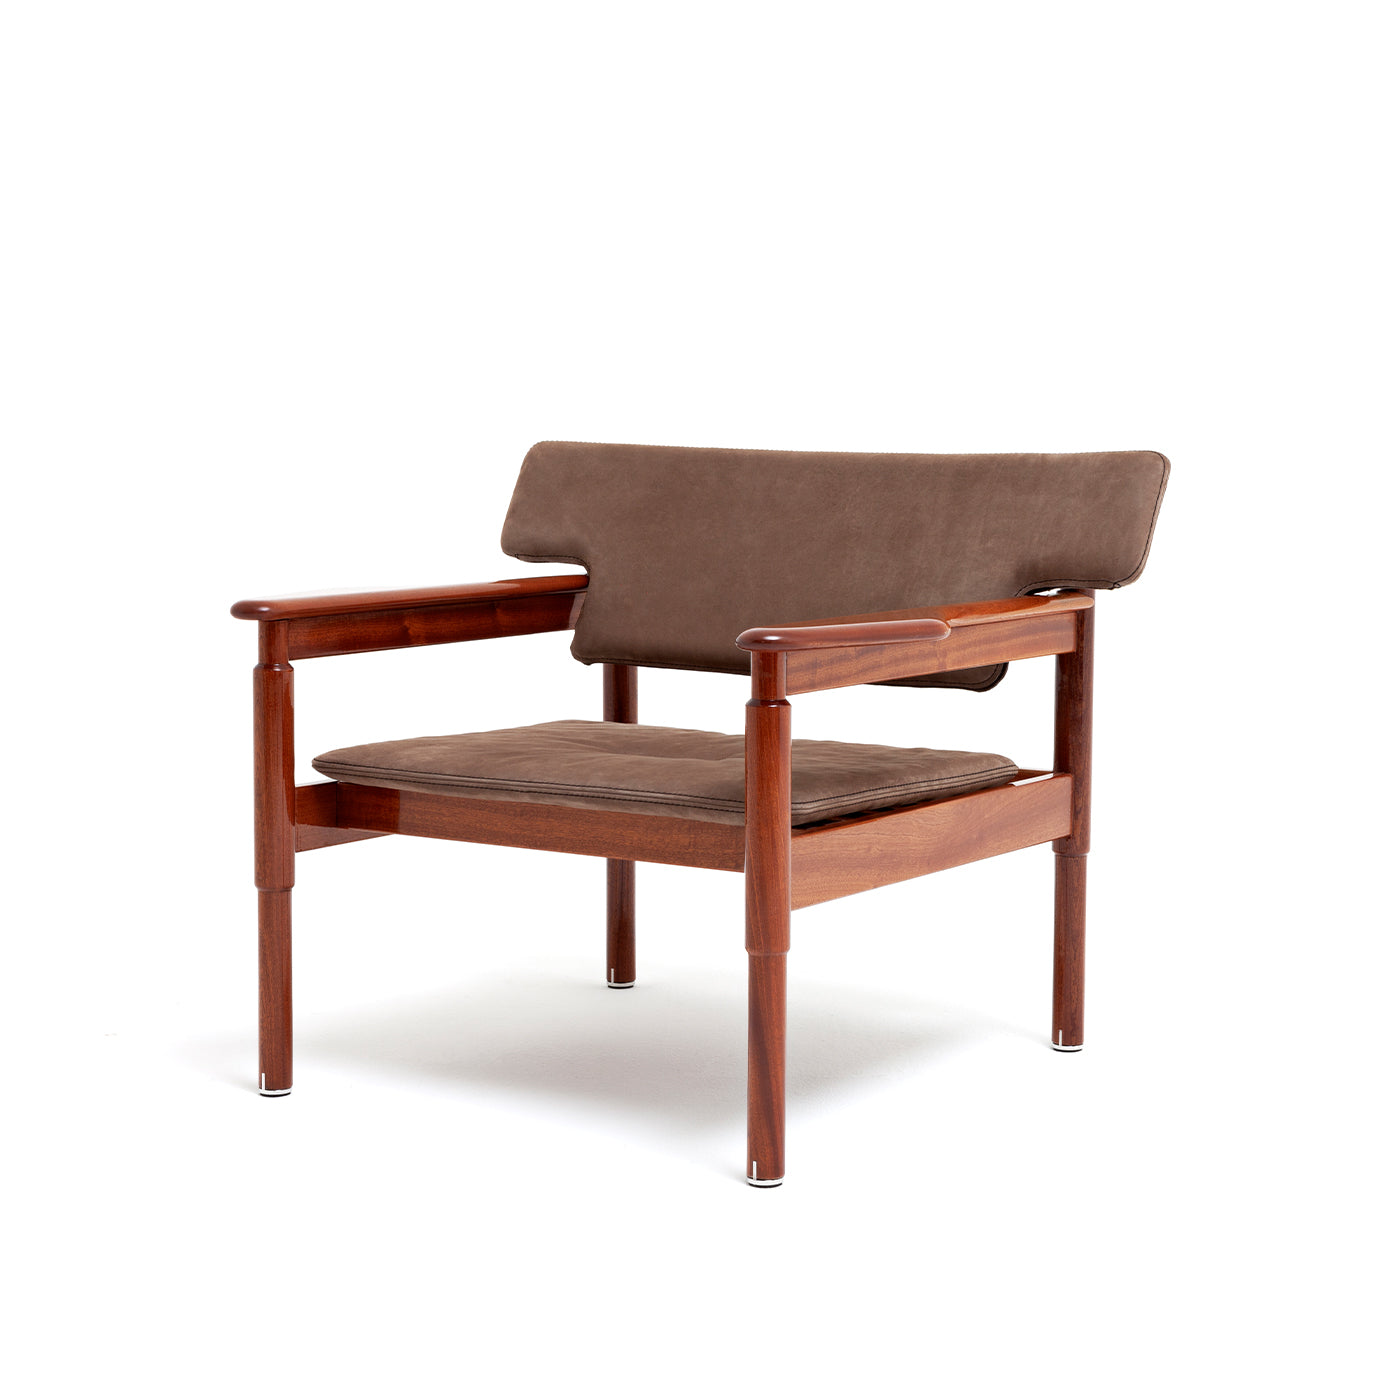 Vieste Large Brown Armchair by Massimo Castagna - Alternative view 2